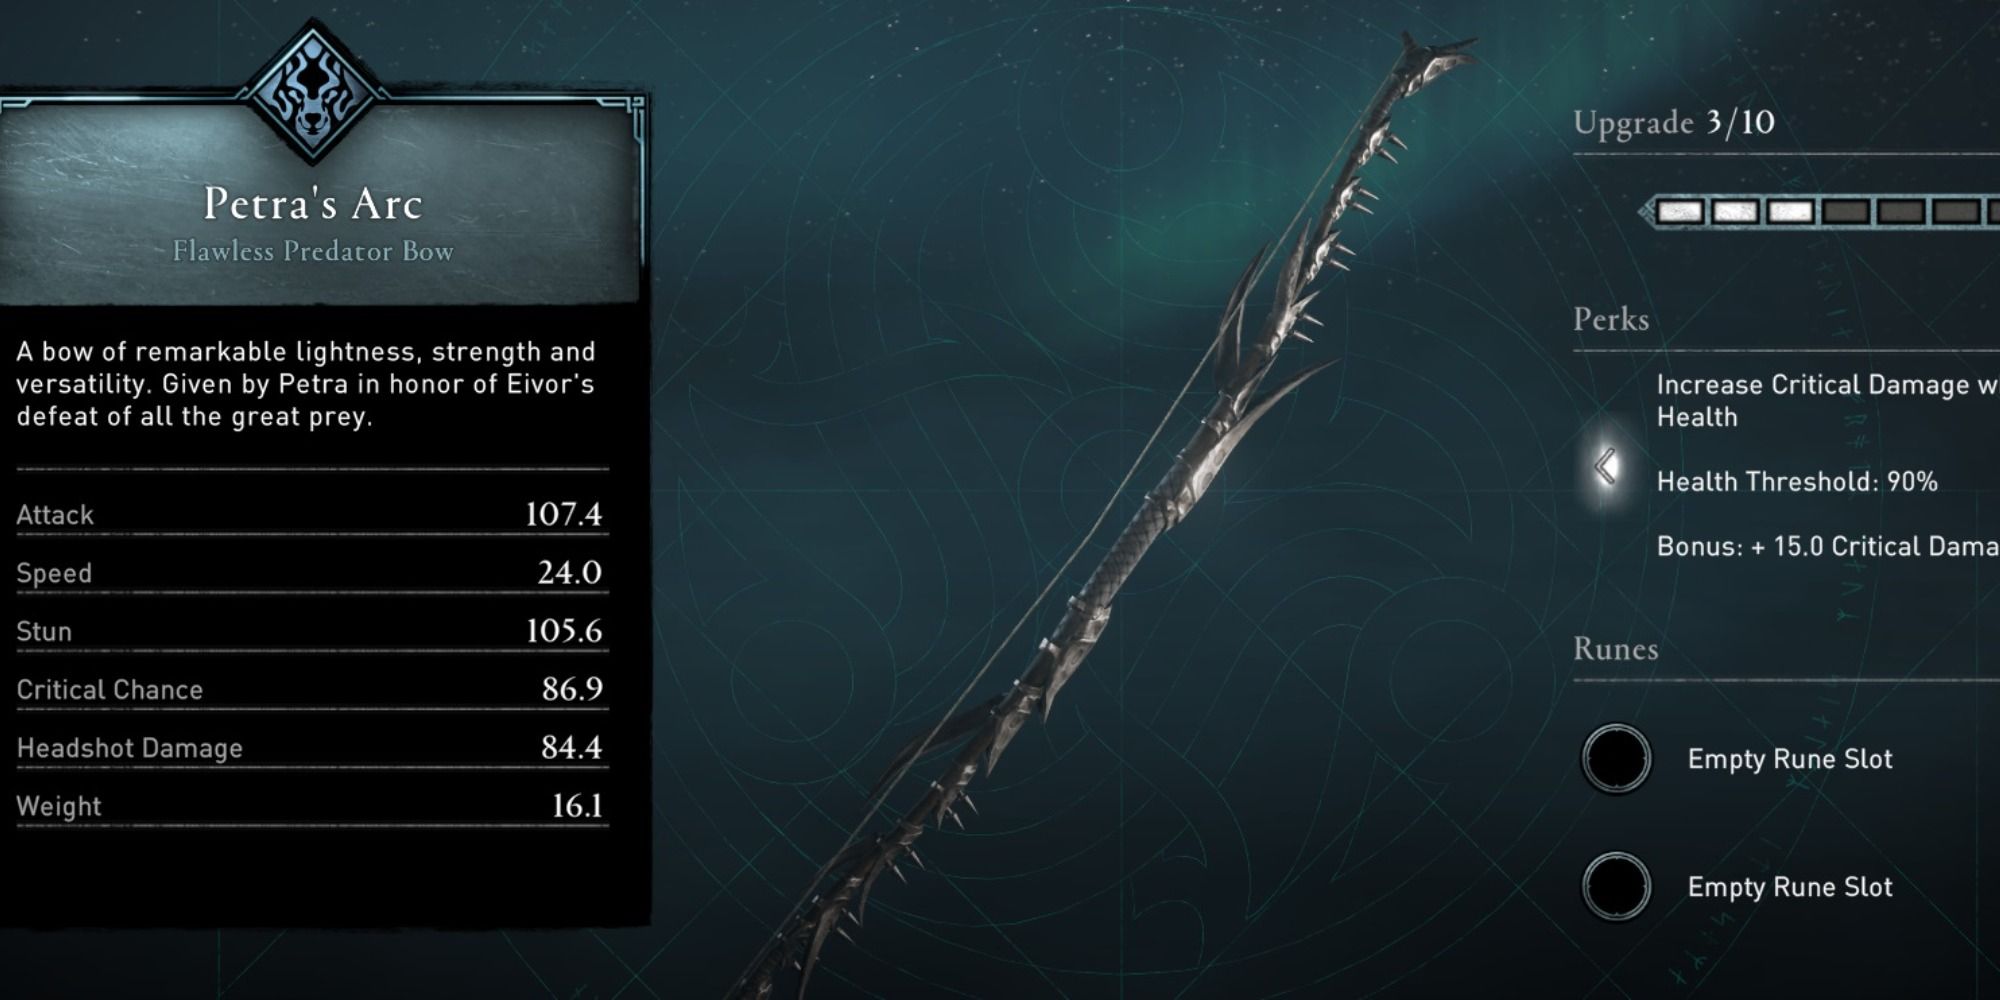 An image of Petra's arc bow and its stats in Assassin's Creed: Valhalla